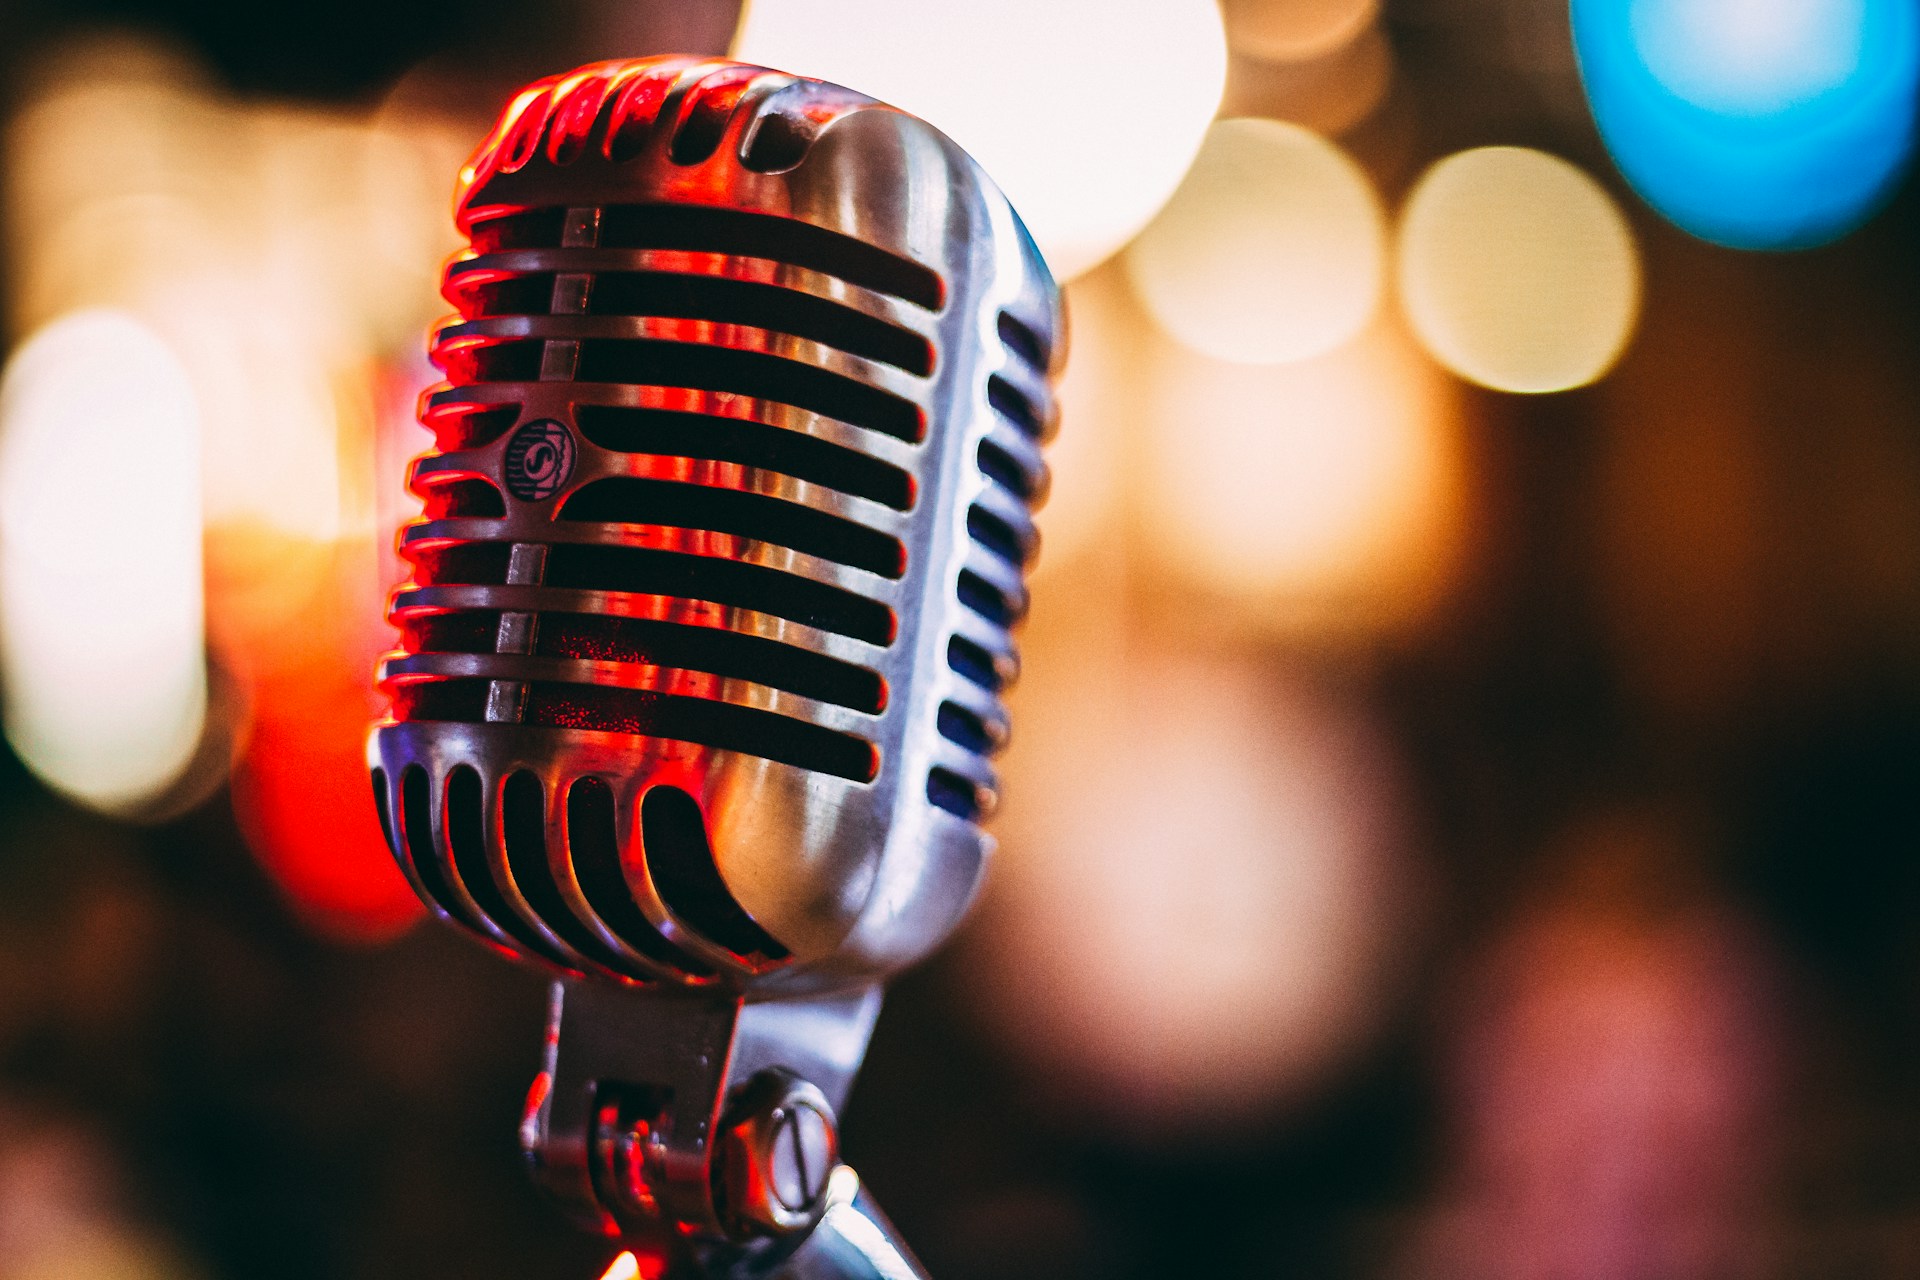 Everything you should know about microphones